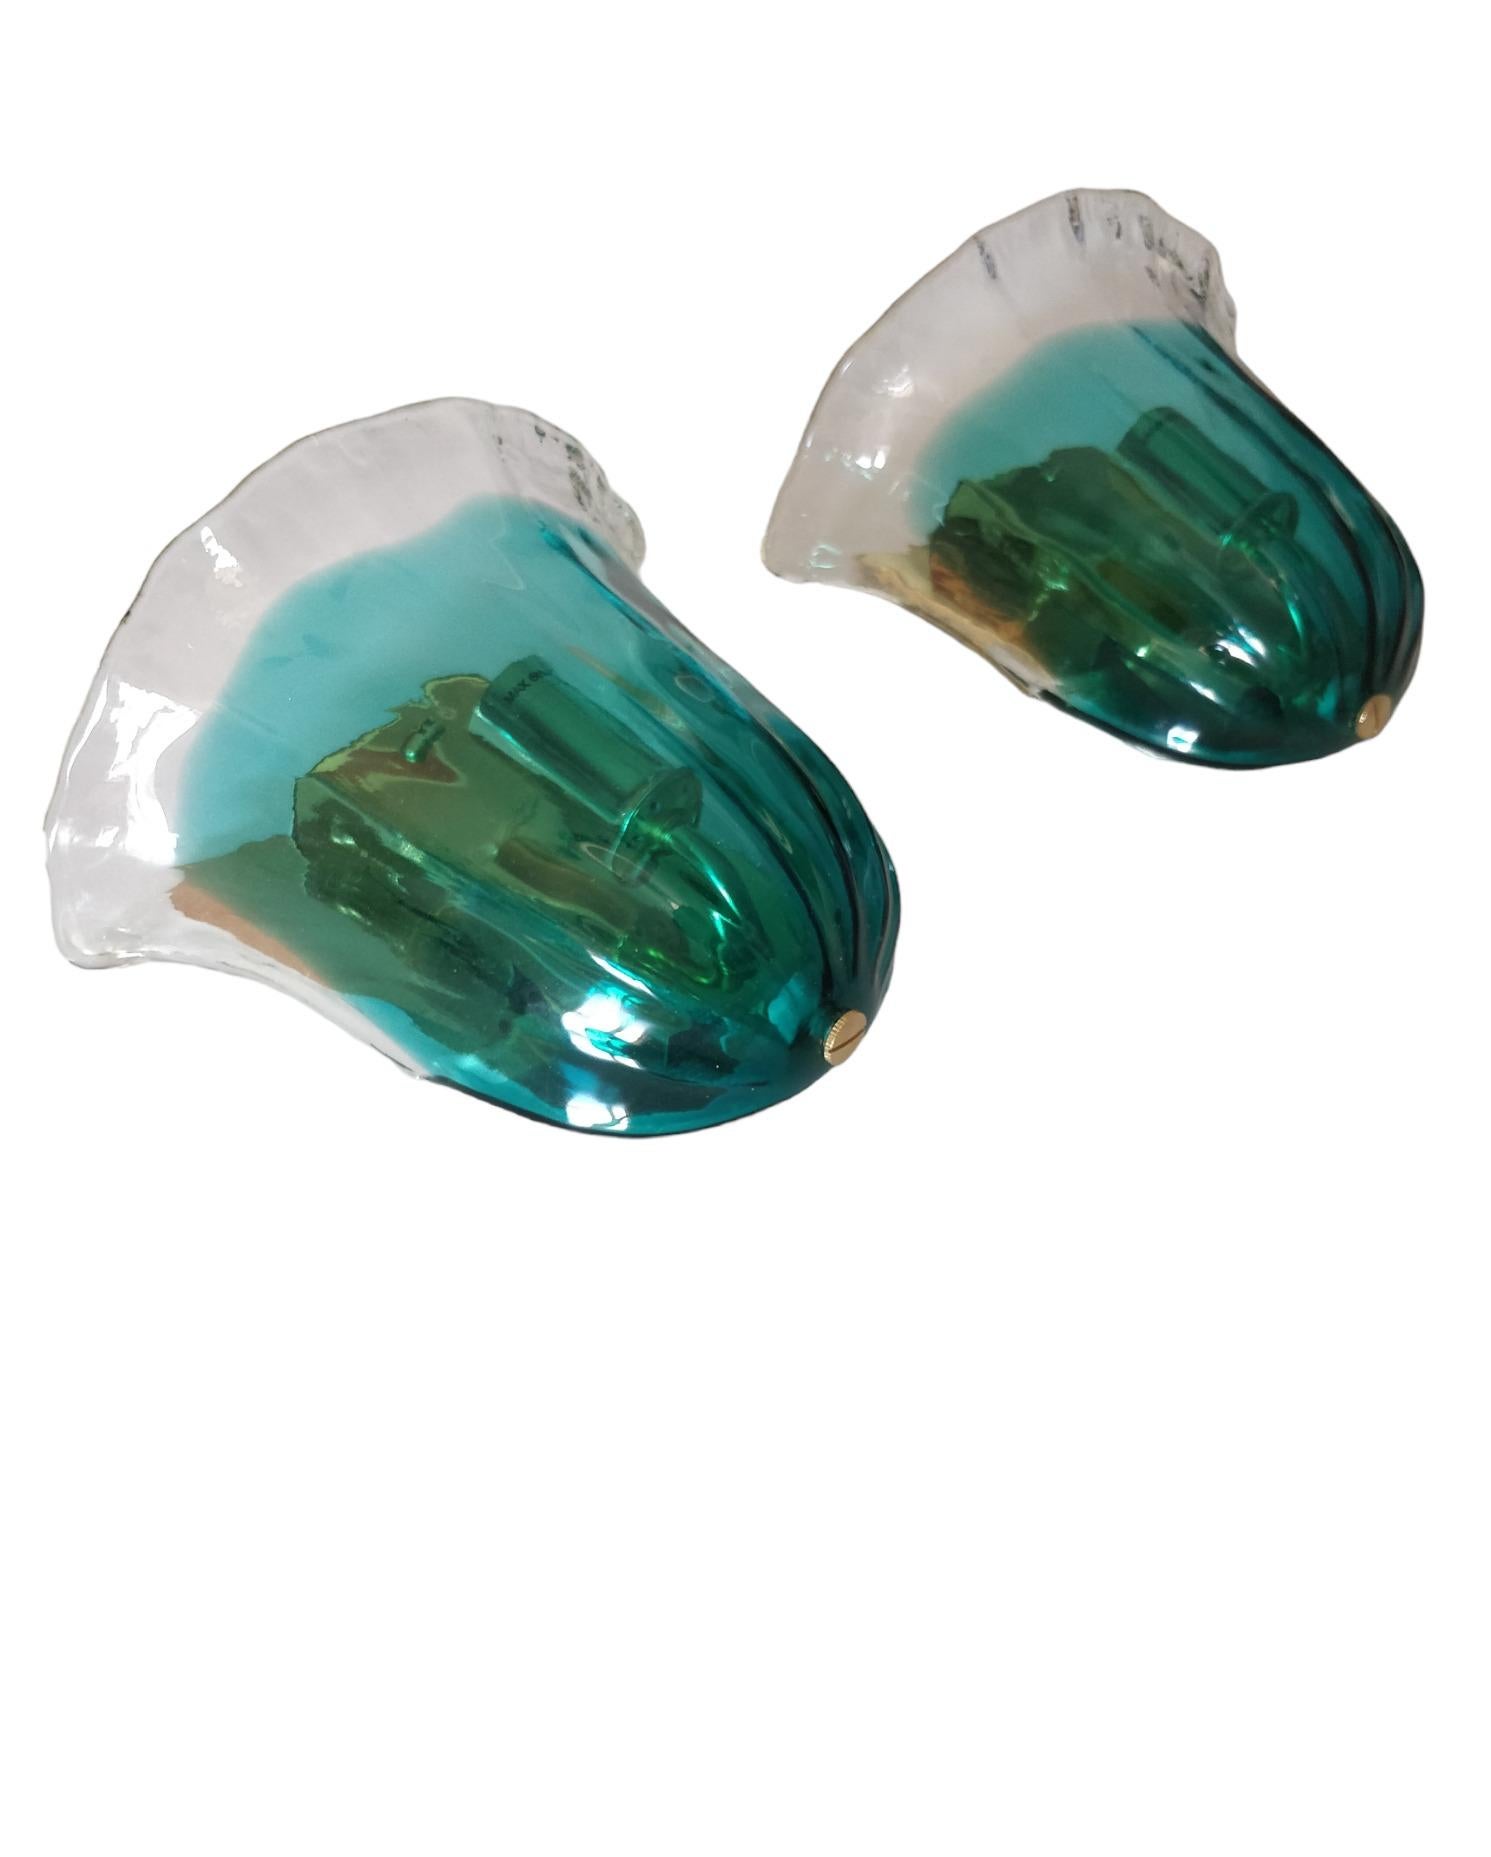 The design of these wall sconces is elegance and refinement, with the glass shaped like a flower that delicately blends green and transparent glass elements to create a captivating visual effect when the light shines through. The glass with a green